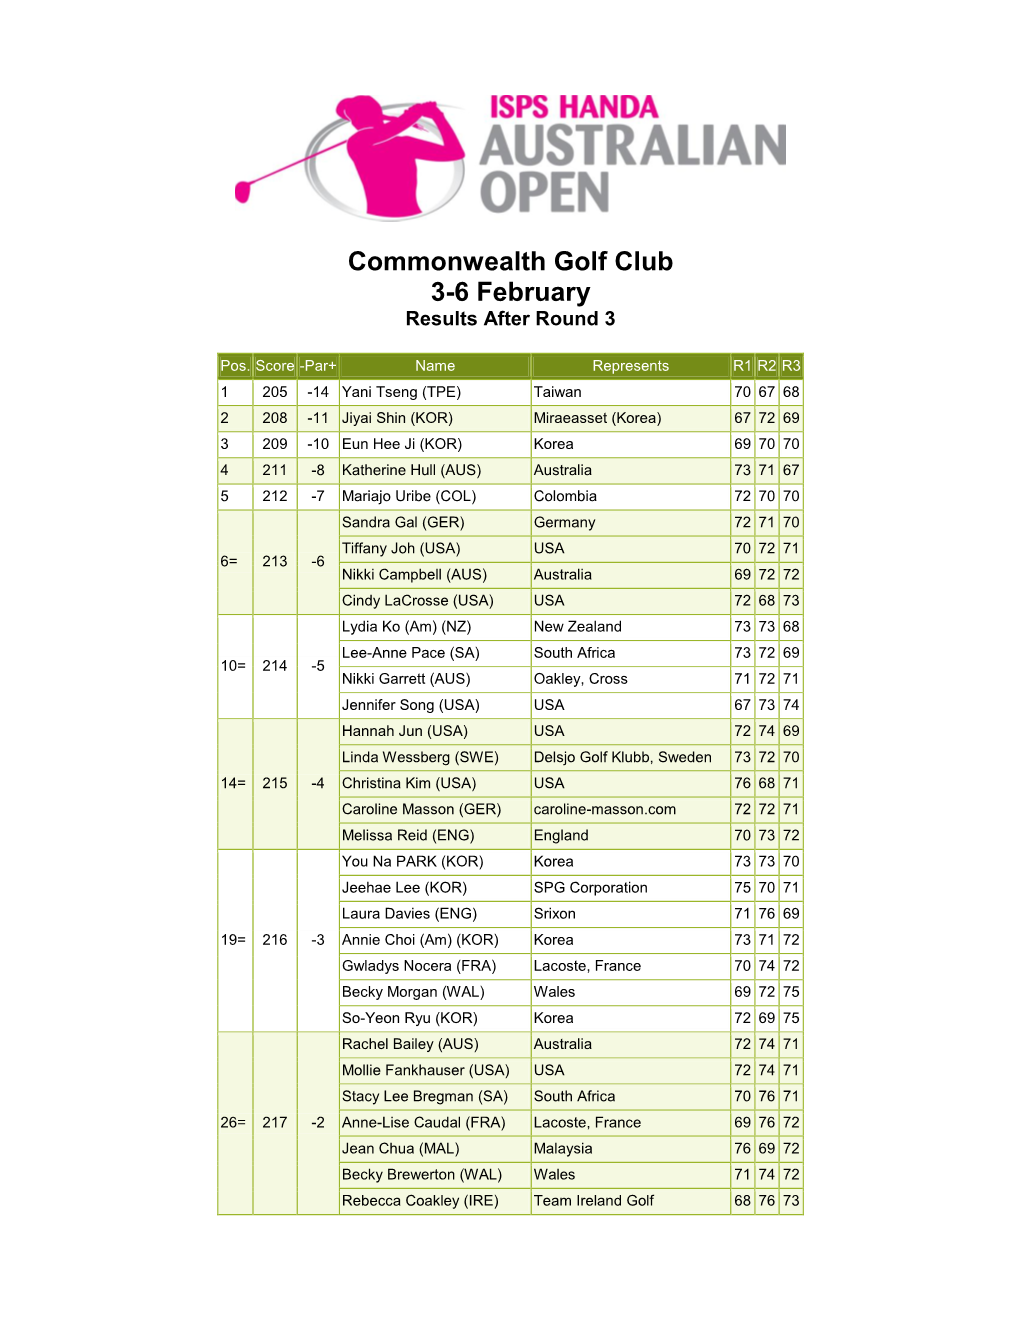 Commonwealth Golf Club 3-6 February Results After Round 3